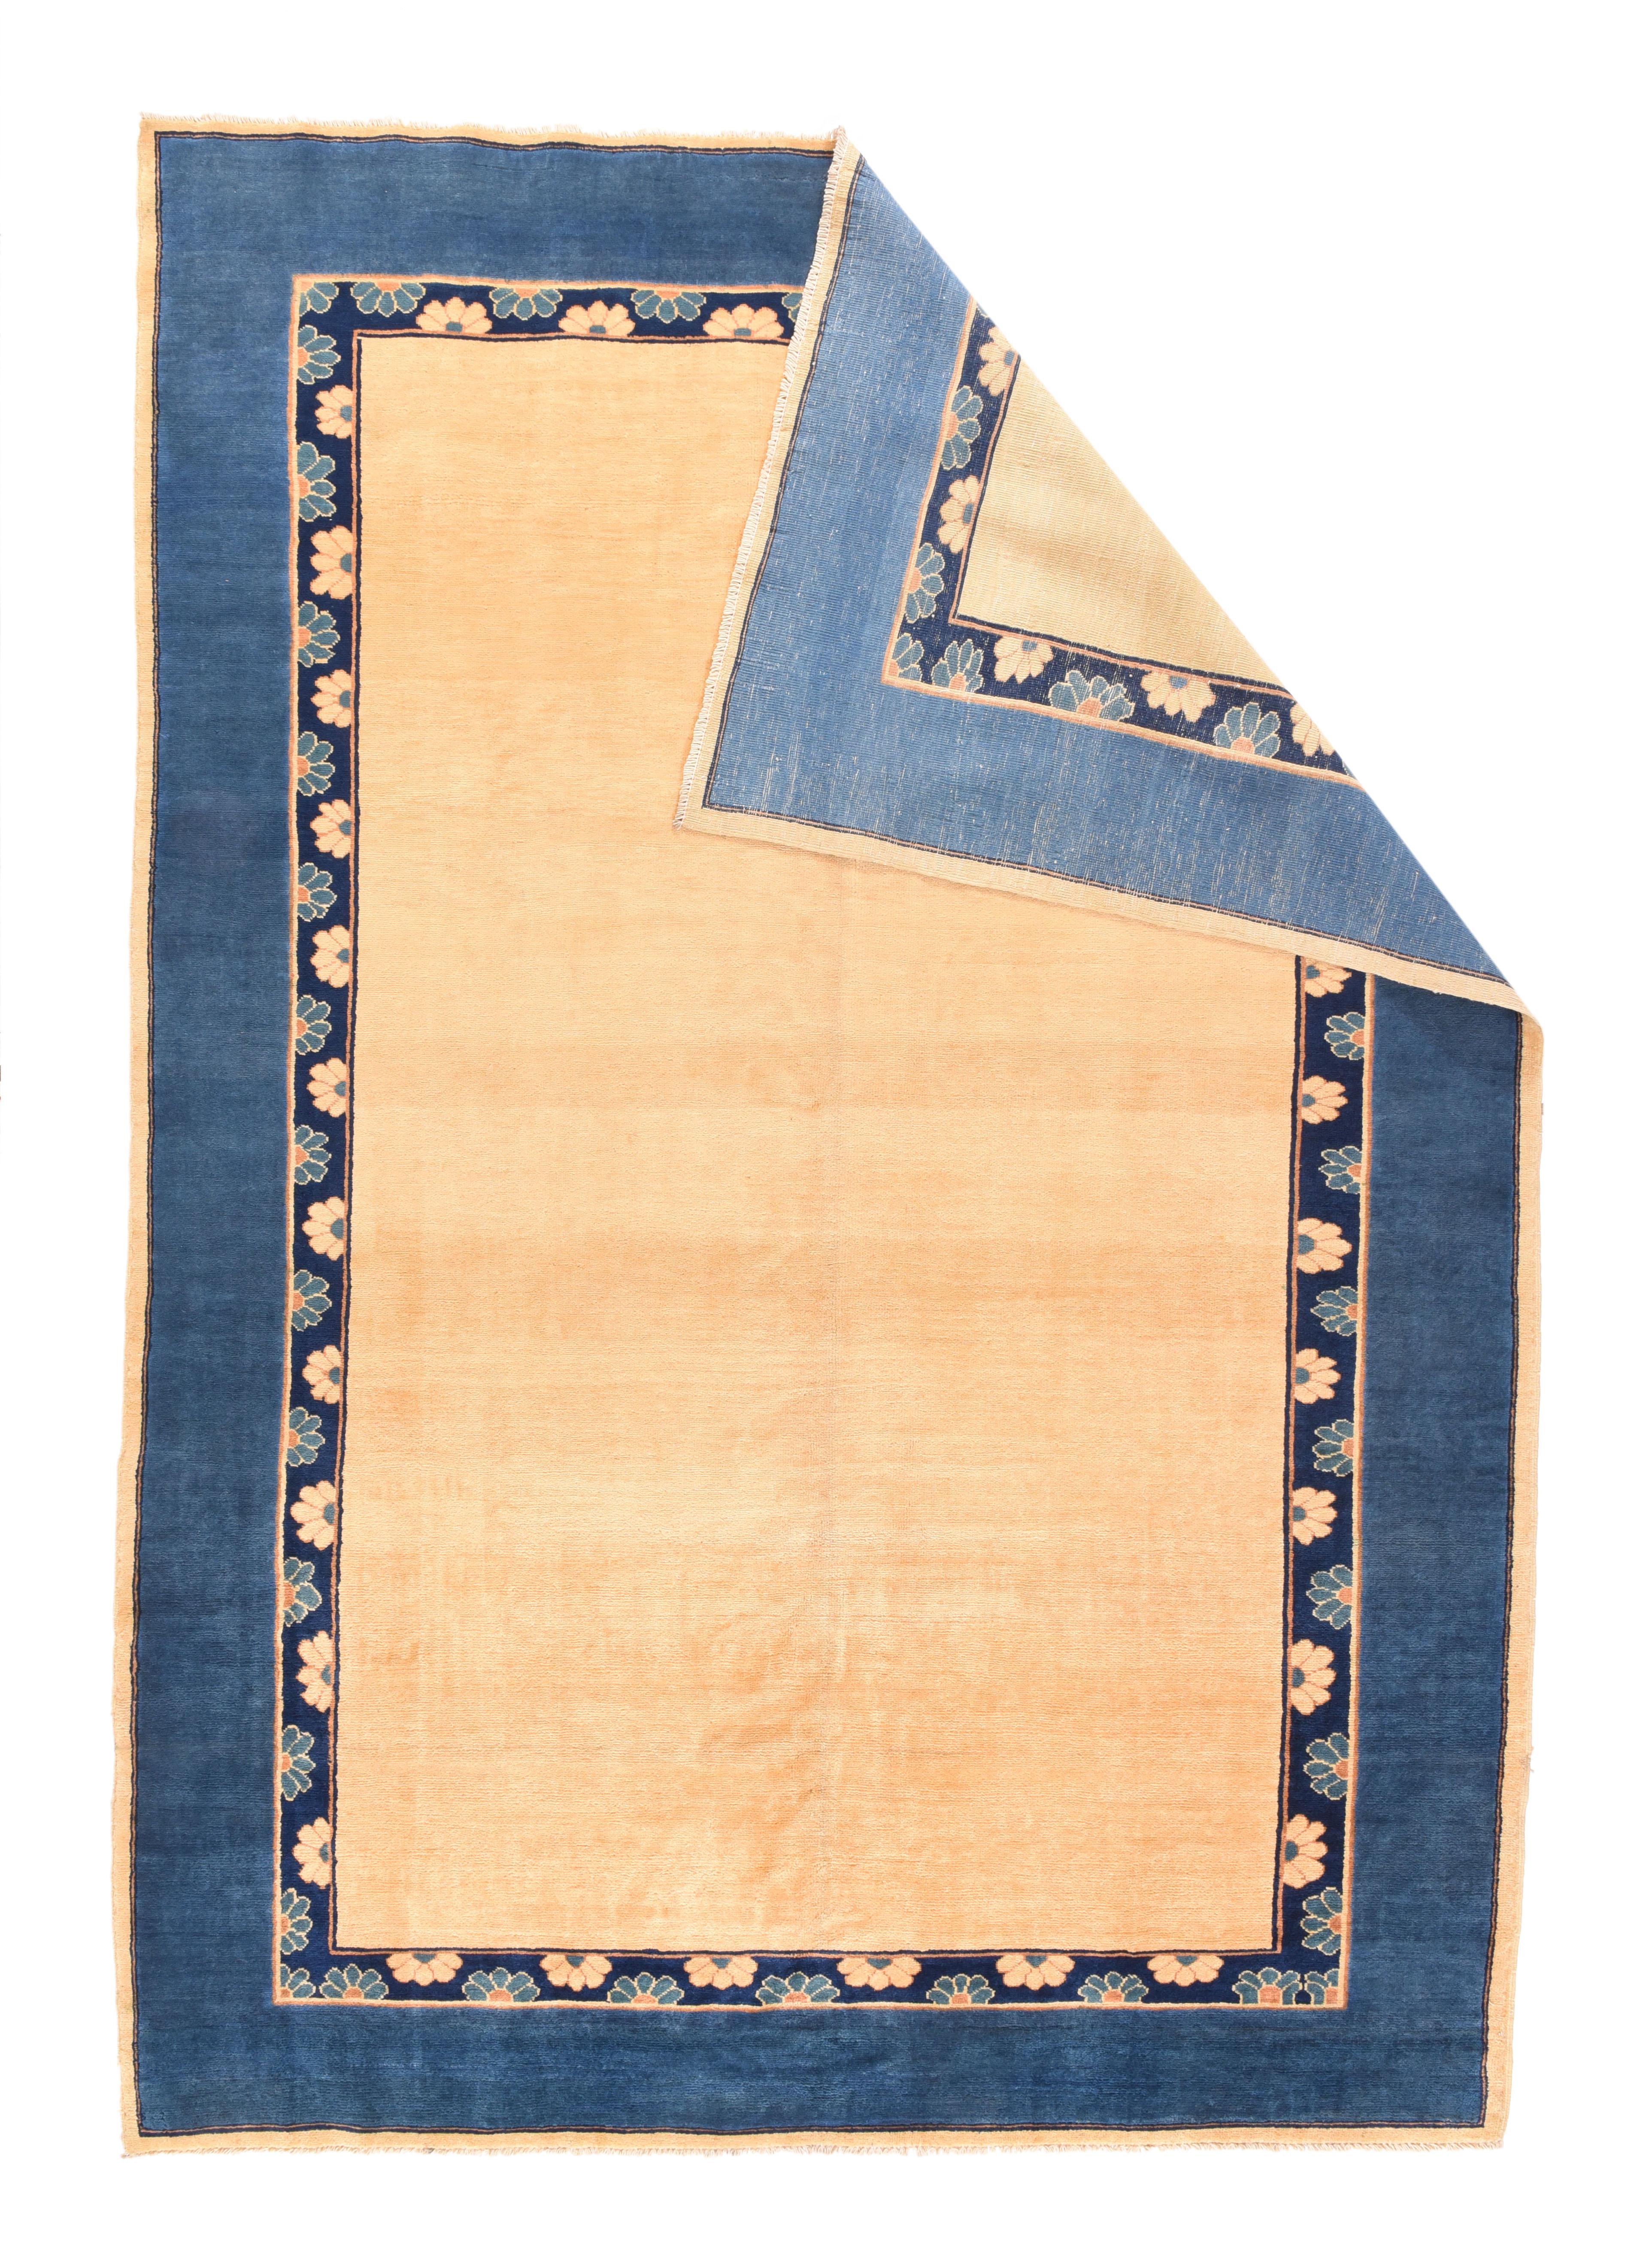 The straw open, plain field is framed by an inner navy border with half rosettes on the sides, and a wide plain blue main stripe, with a narrw straw outer minor finishing the layout. Iner border has a faintly Chinese look. Moderate/medium weave. As